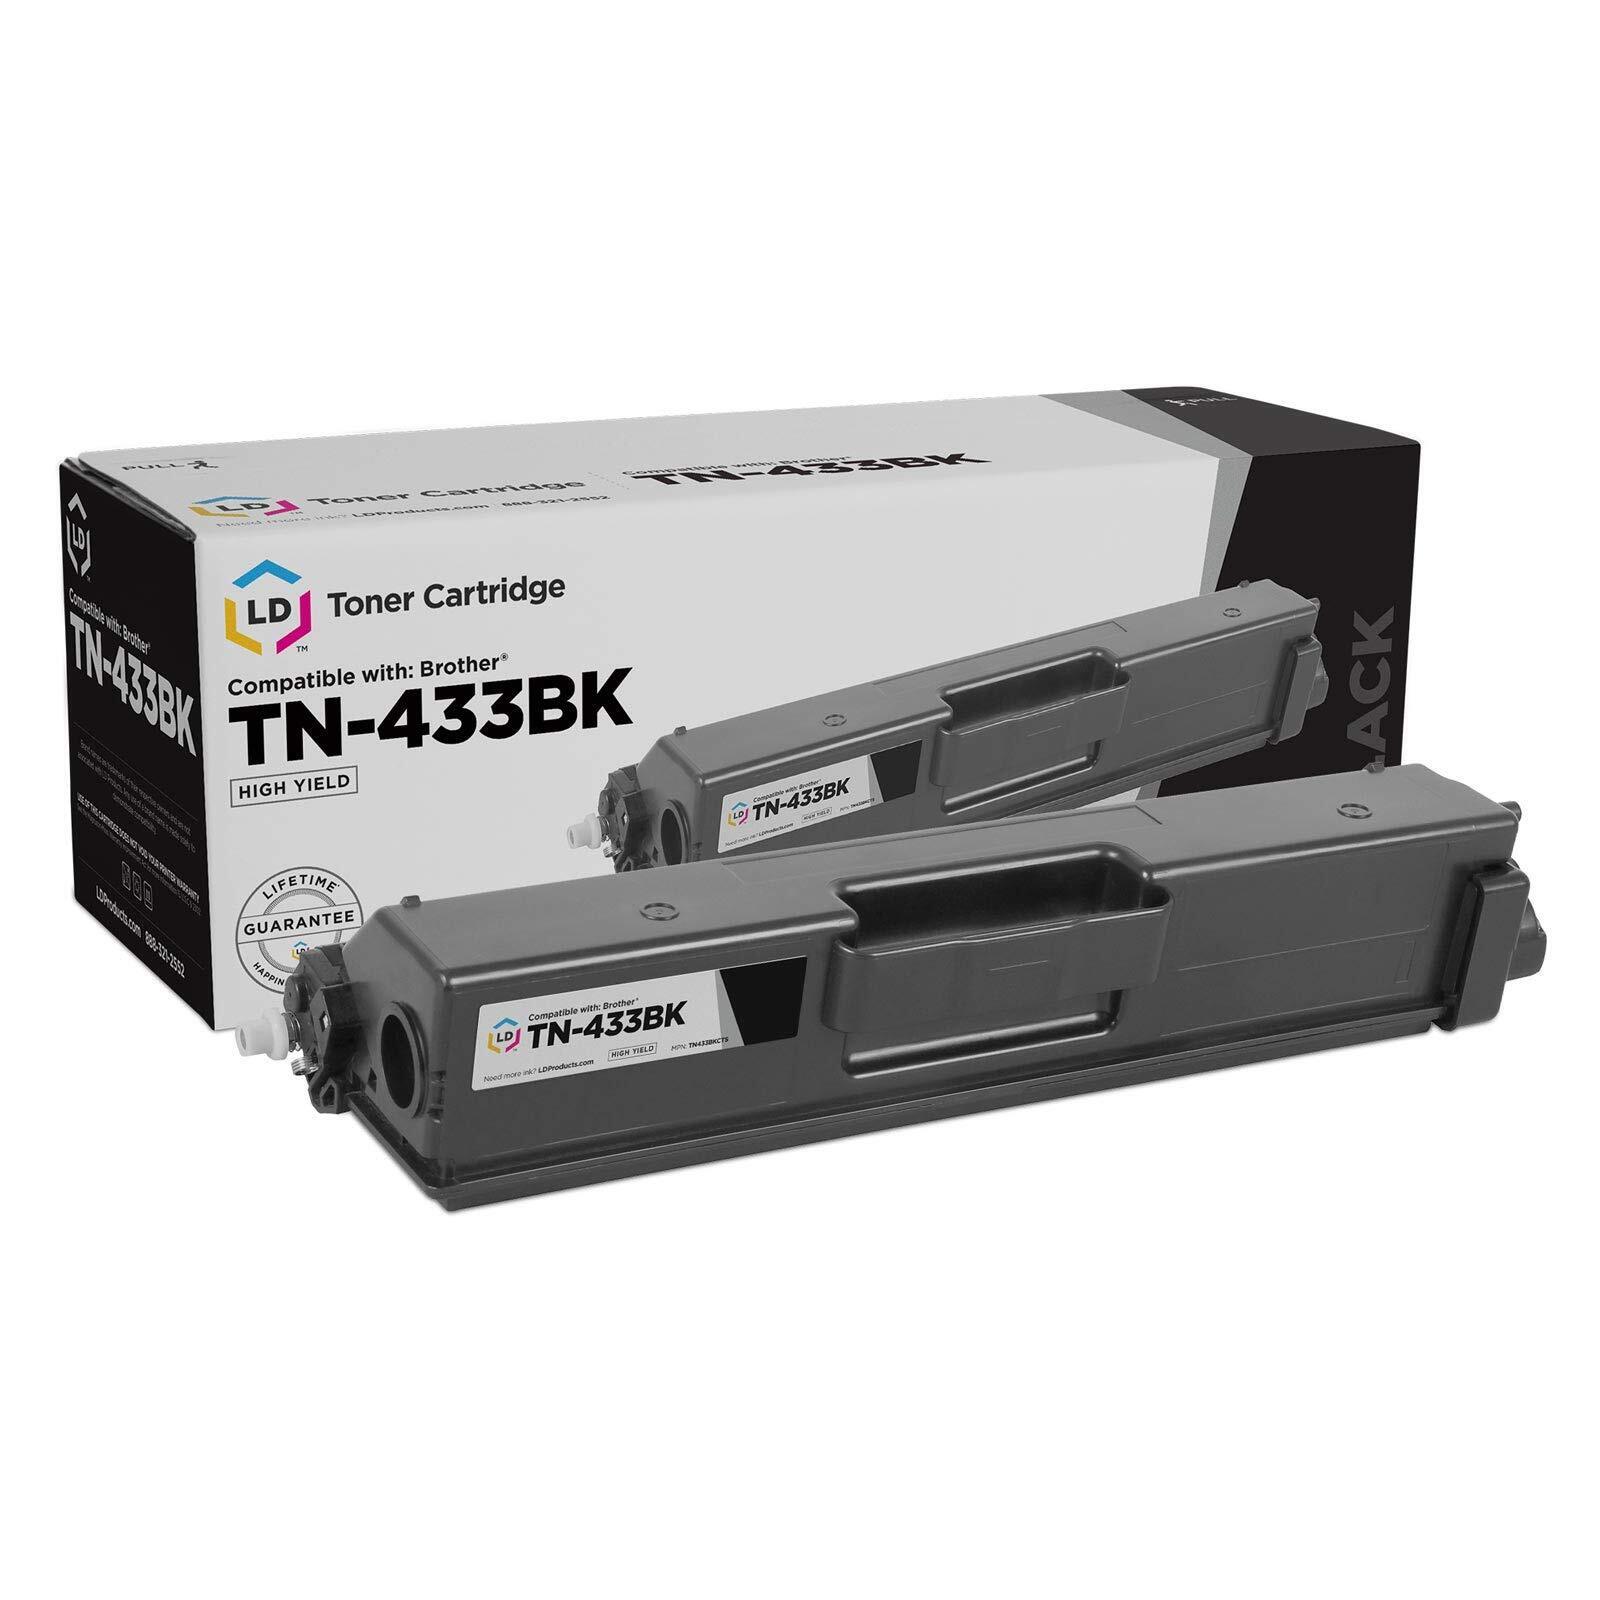 LD Compatible Brother TN431 / TN433 HY Black Toner Cartridge (4,500 Page Yield)